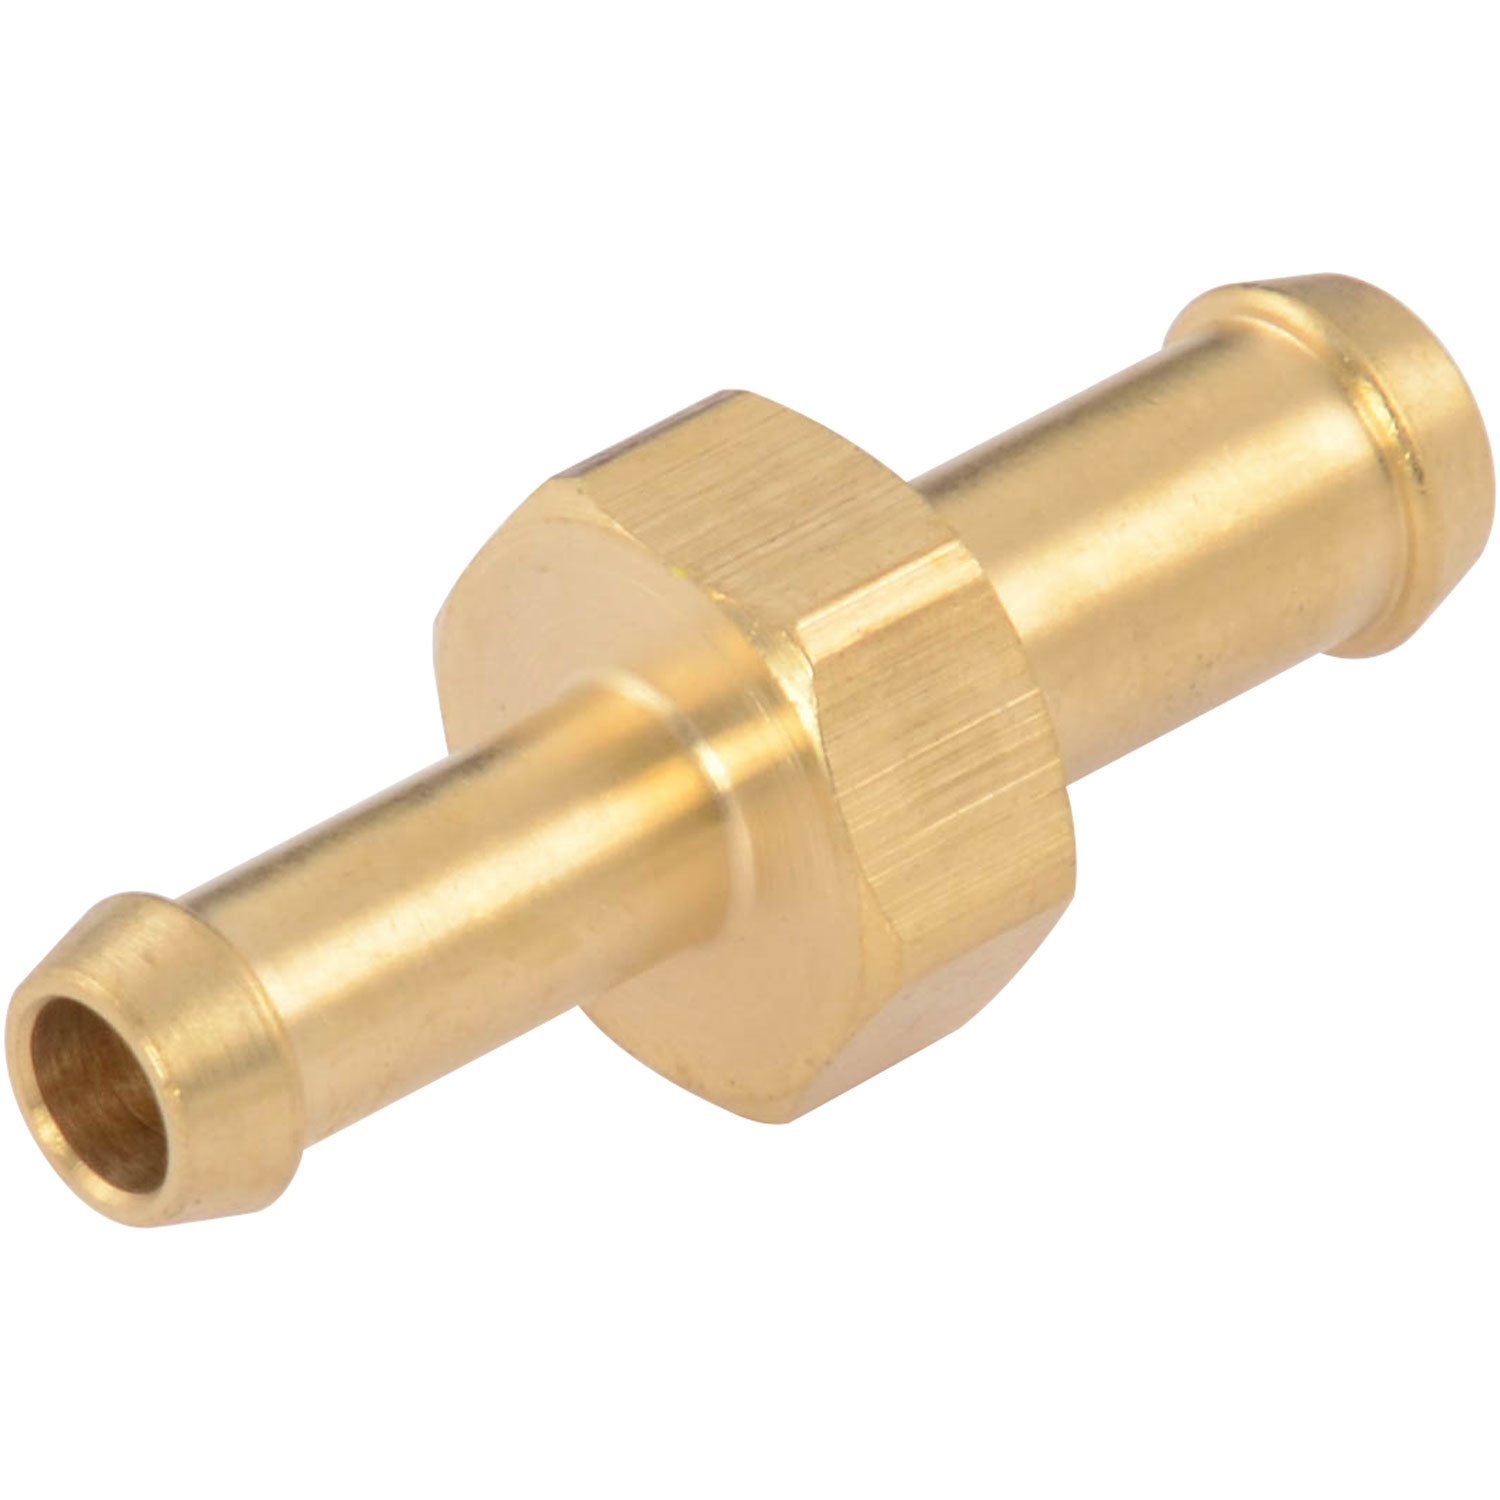 Brass Hose Adapter for 5/16 in. to 1/4